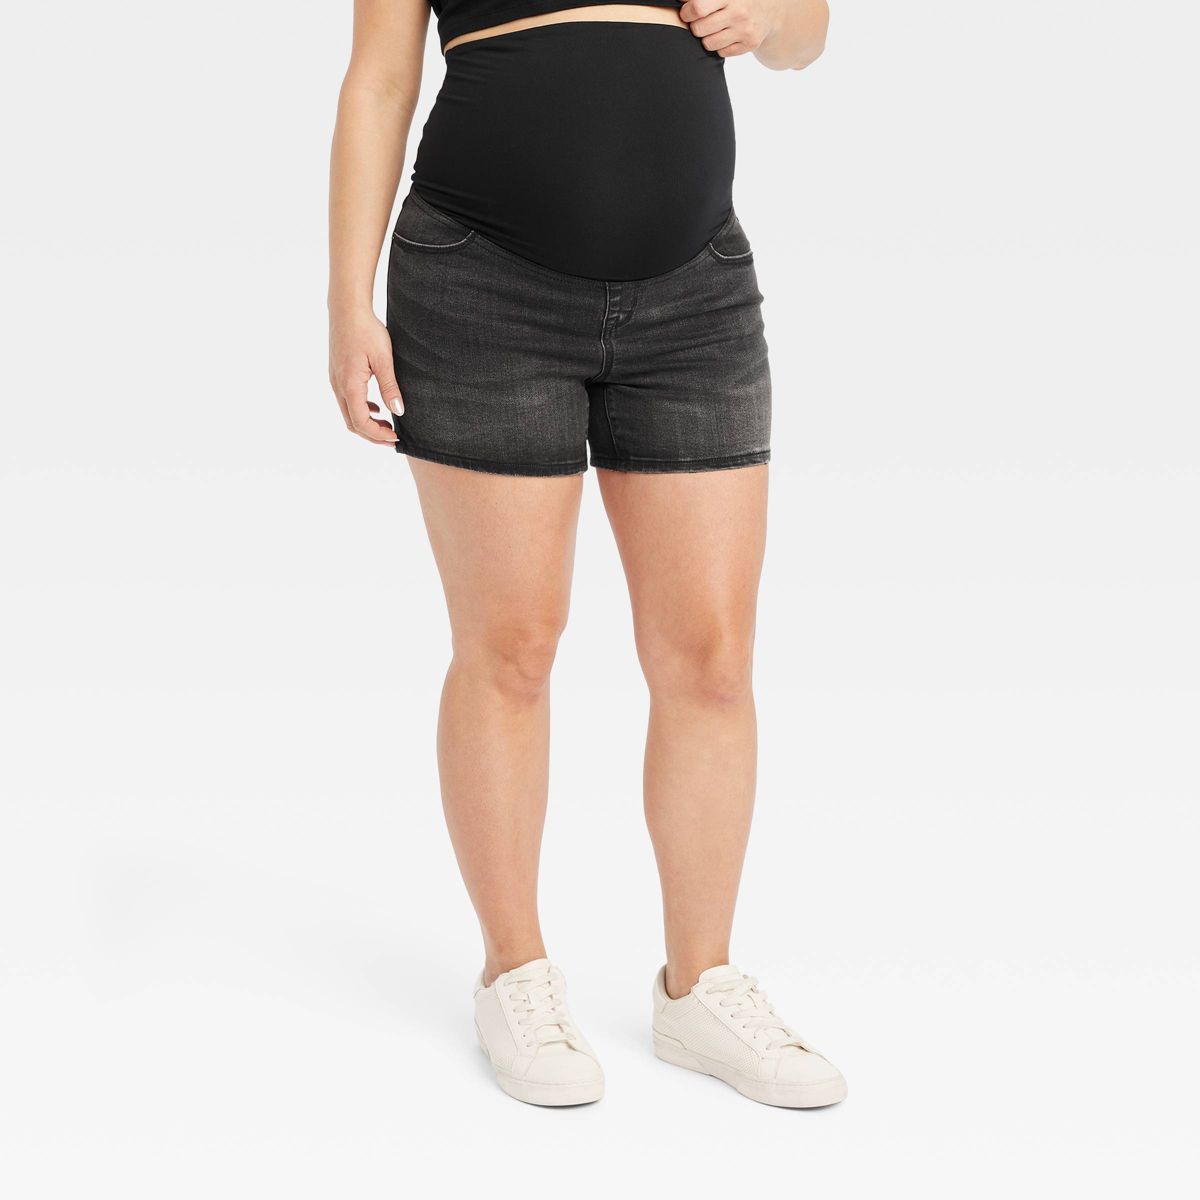 Over Belly Midi Maternity Jean Shorts - Isabel Maternity by Ingrid & Isabel™ | Target